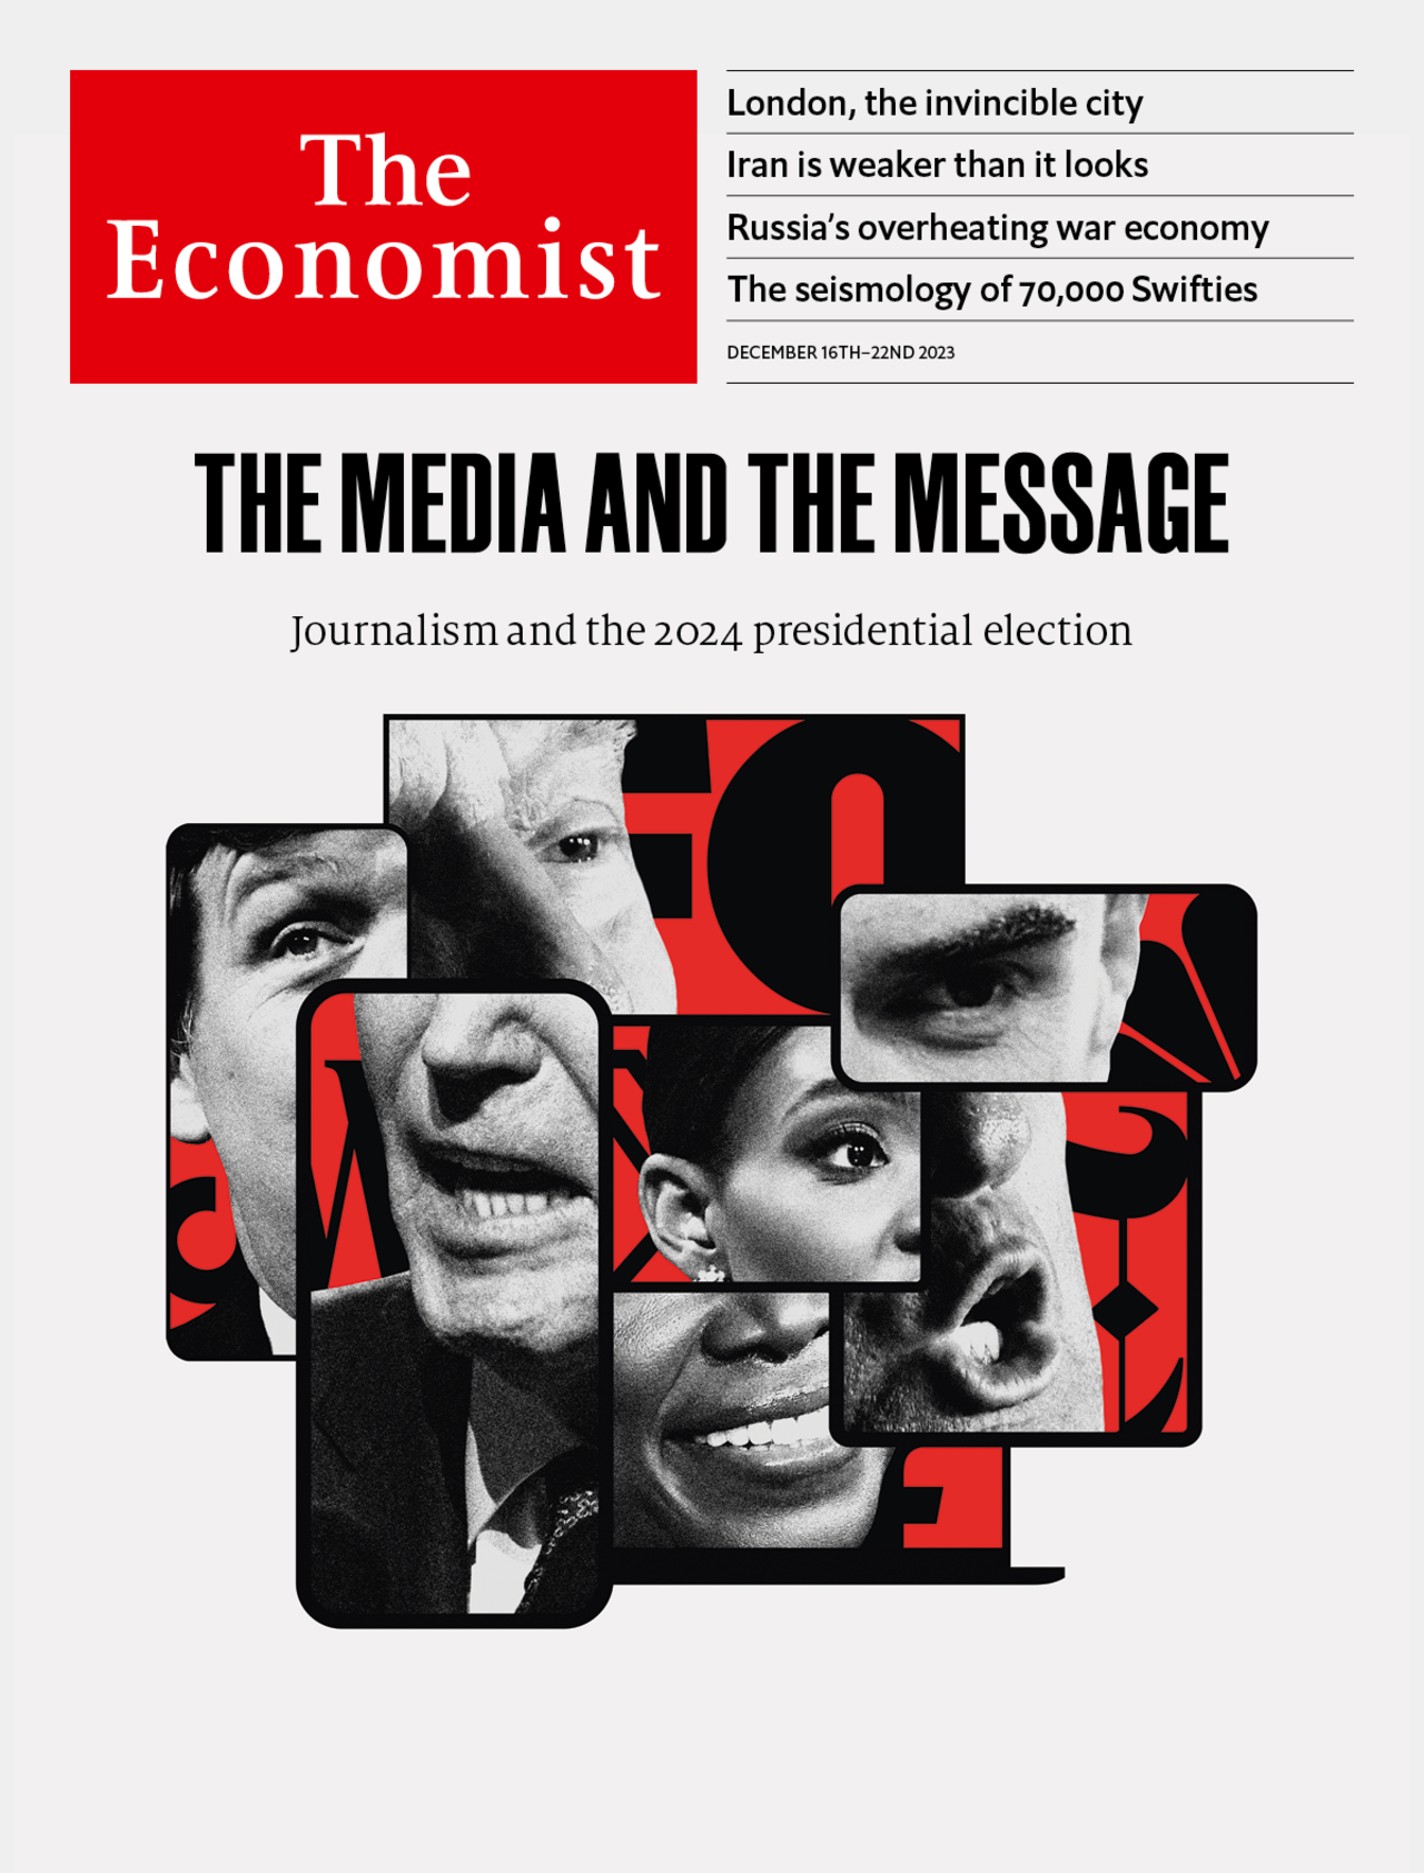 The media and the message: Journalism and the 2024 presidential election